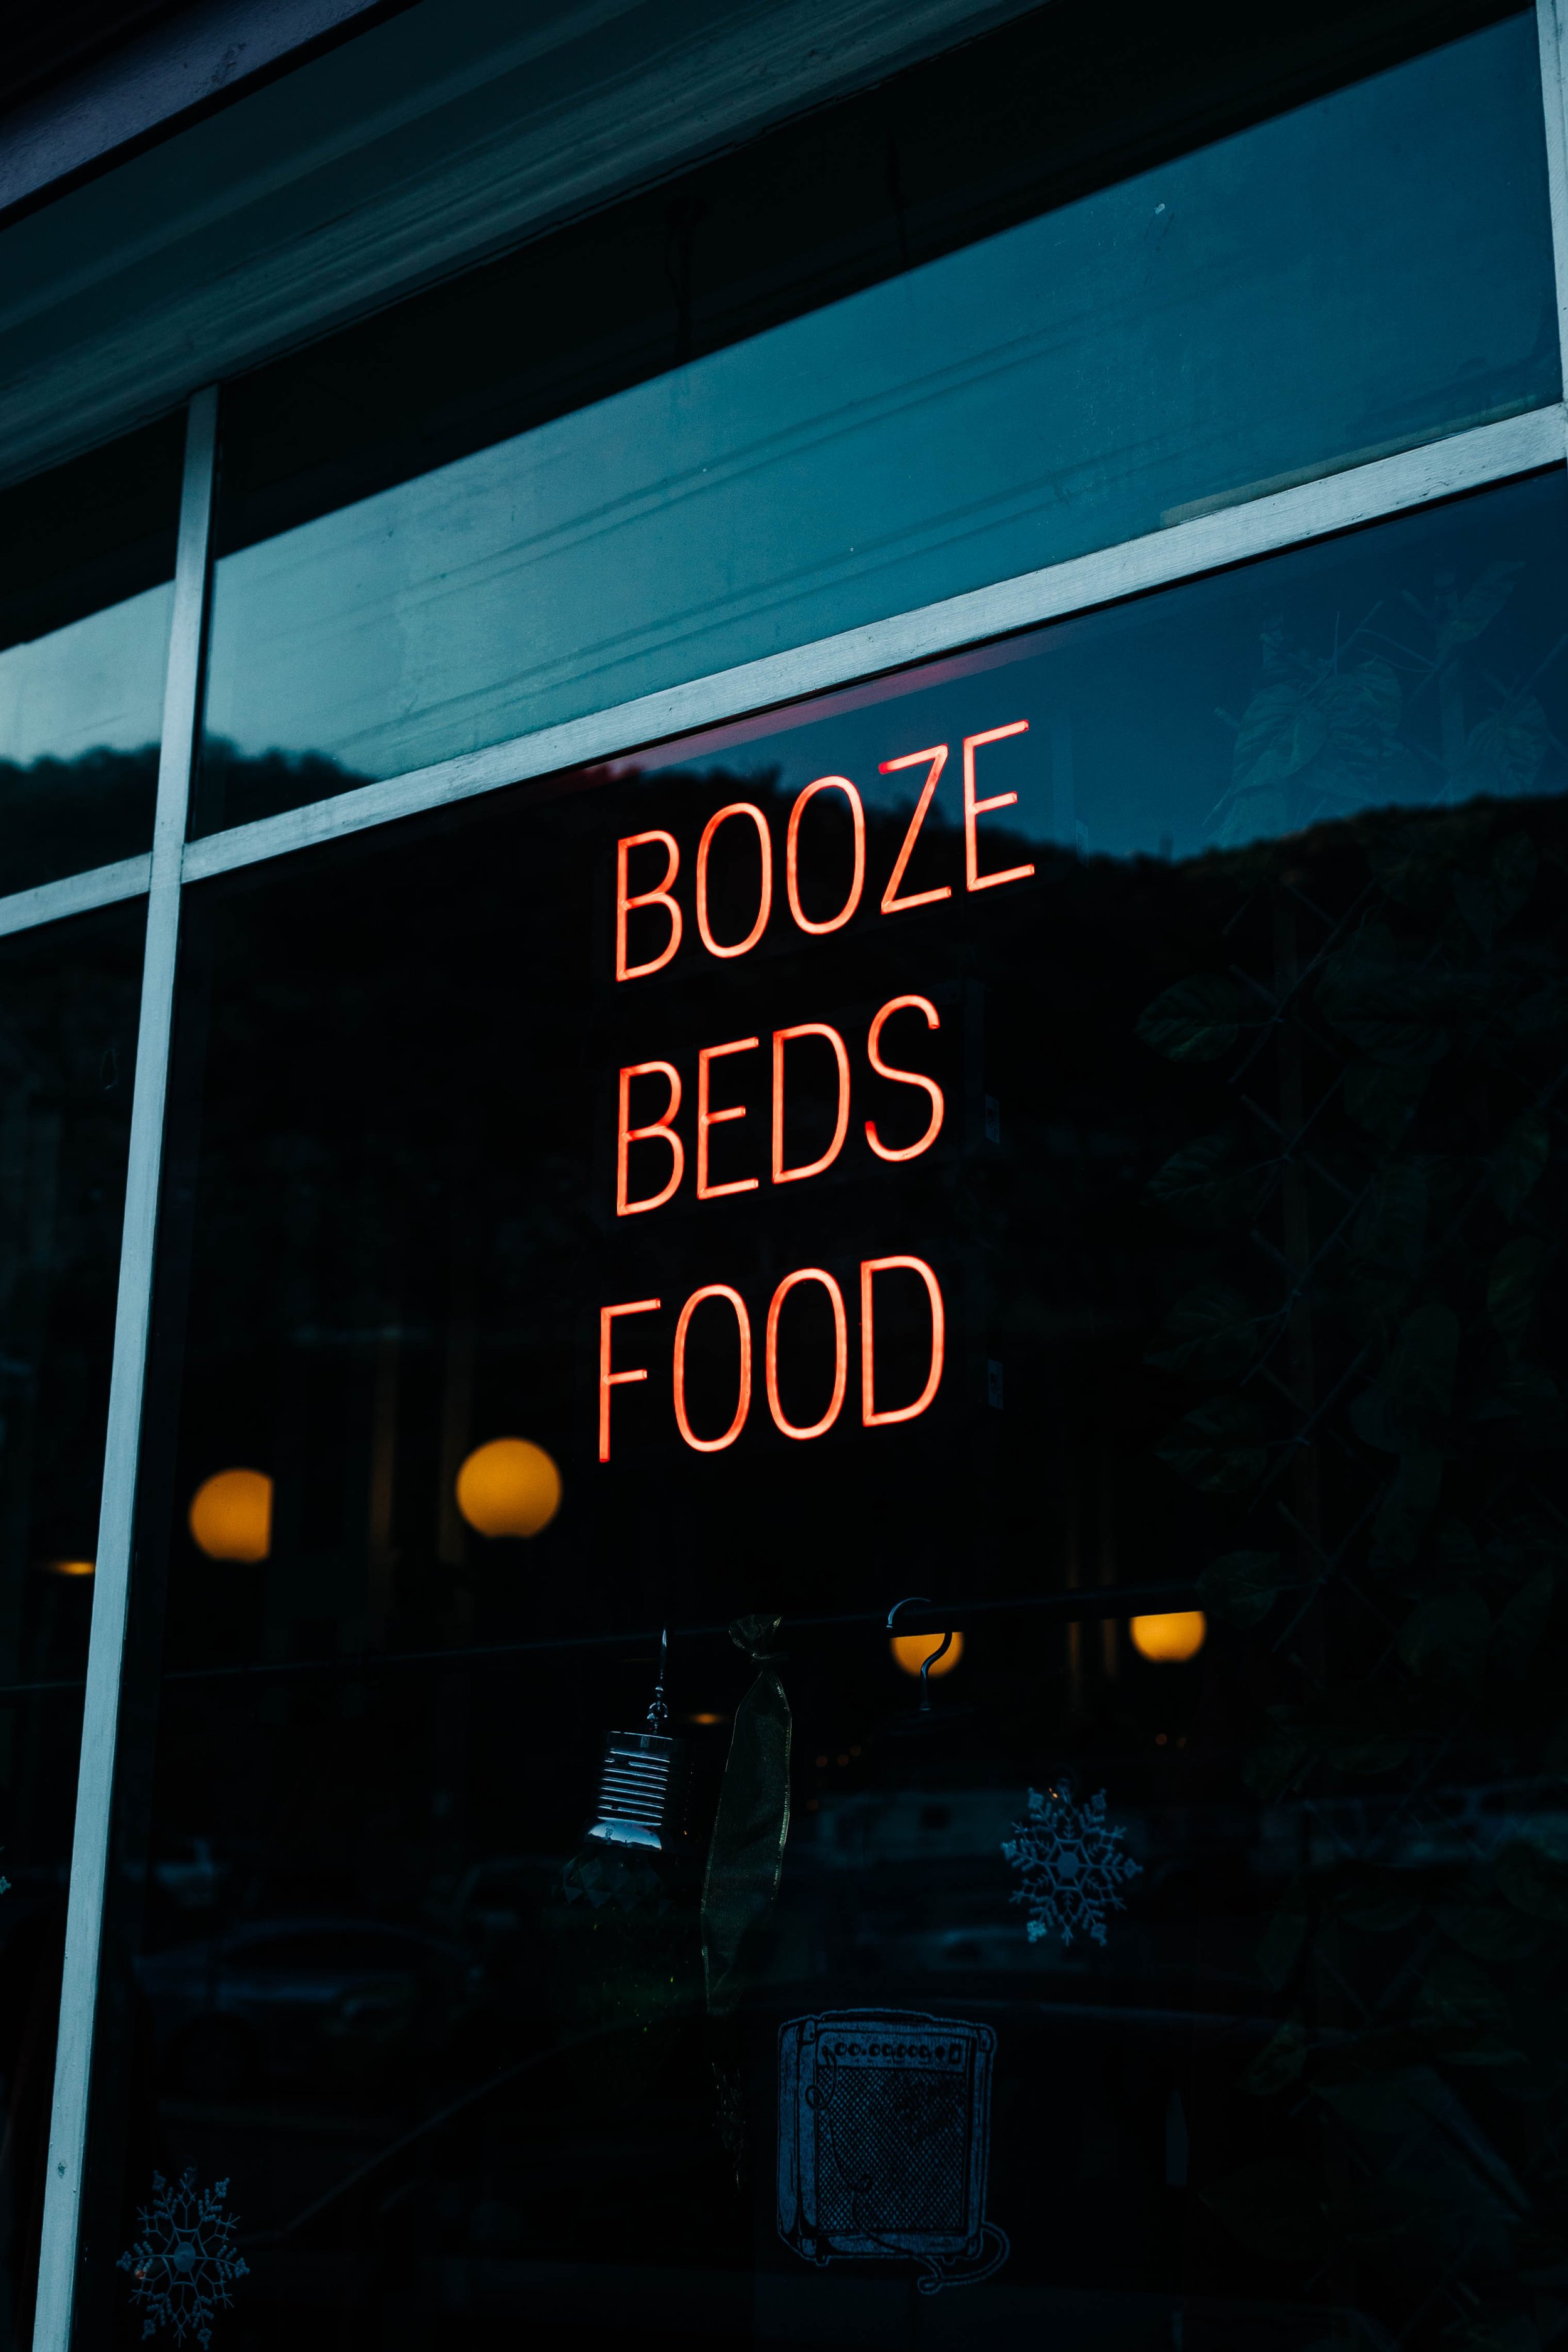 A sign that reads "Booze Beds Food" in Bisbee, Arizona.